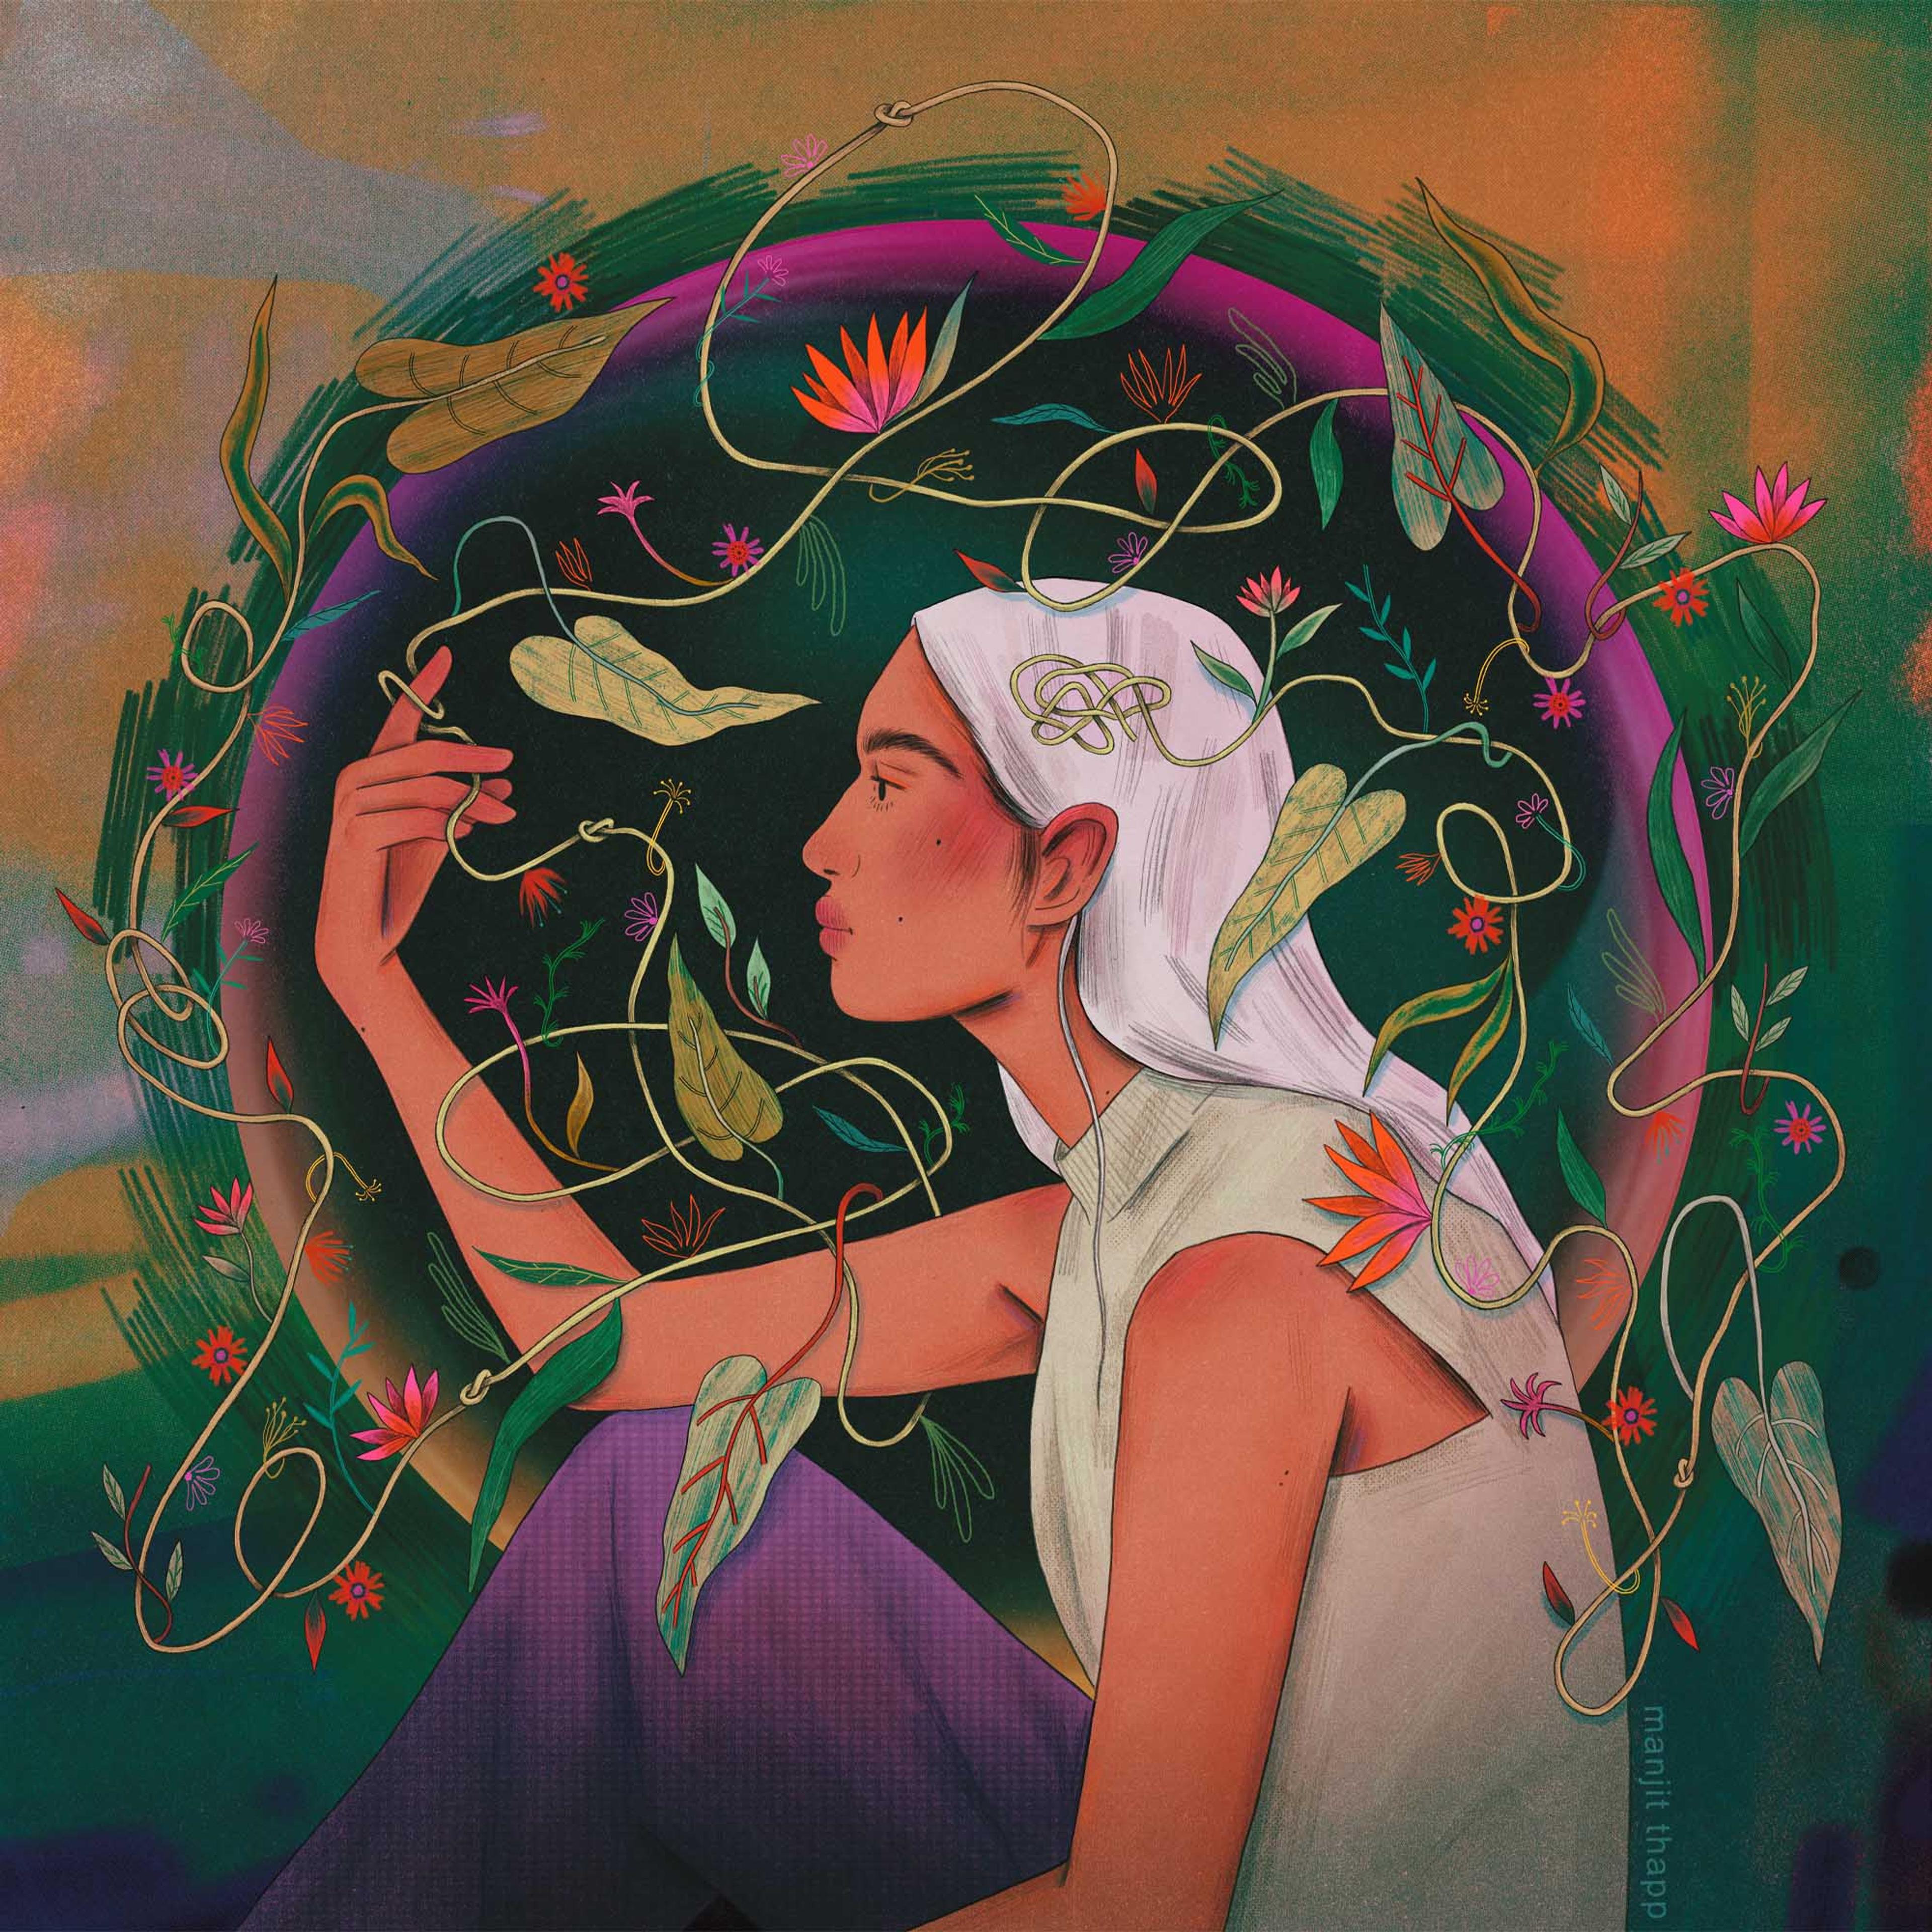 An illustration of a person, side on, sitting with one leg in view bent up towards their body, they are holding with their right hand, some vines that surround them in a circle, along with an orb of purples and greens. The person is wearing a white scarf to cover their head and hair, and a white sleeveless top, their leg is covered with purple fabric.